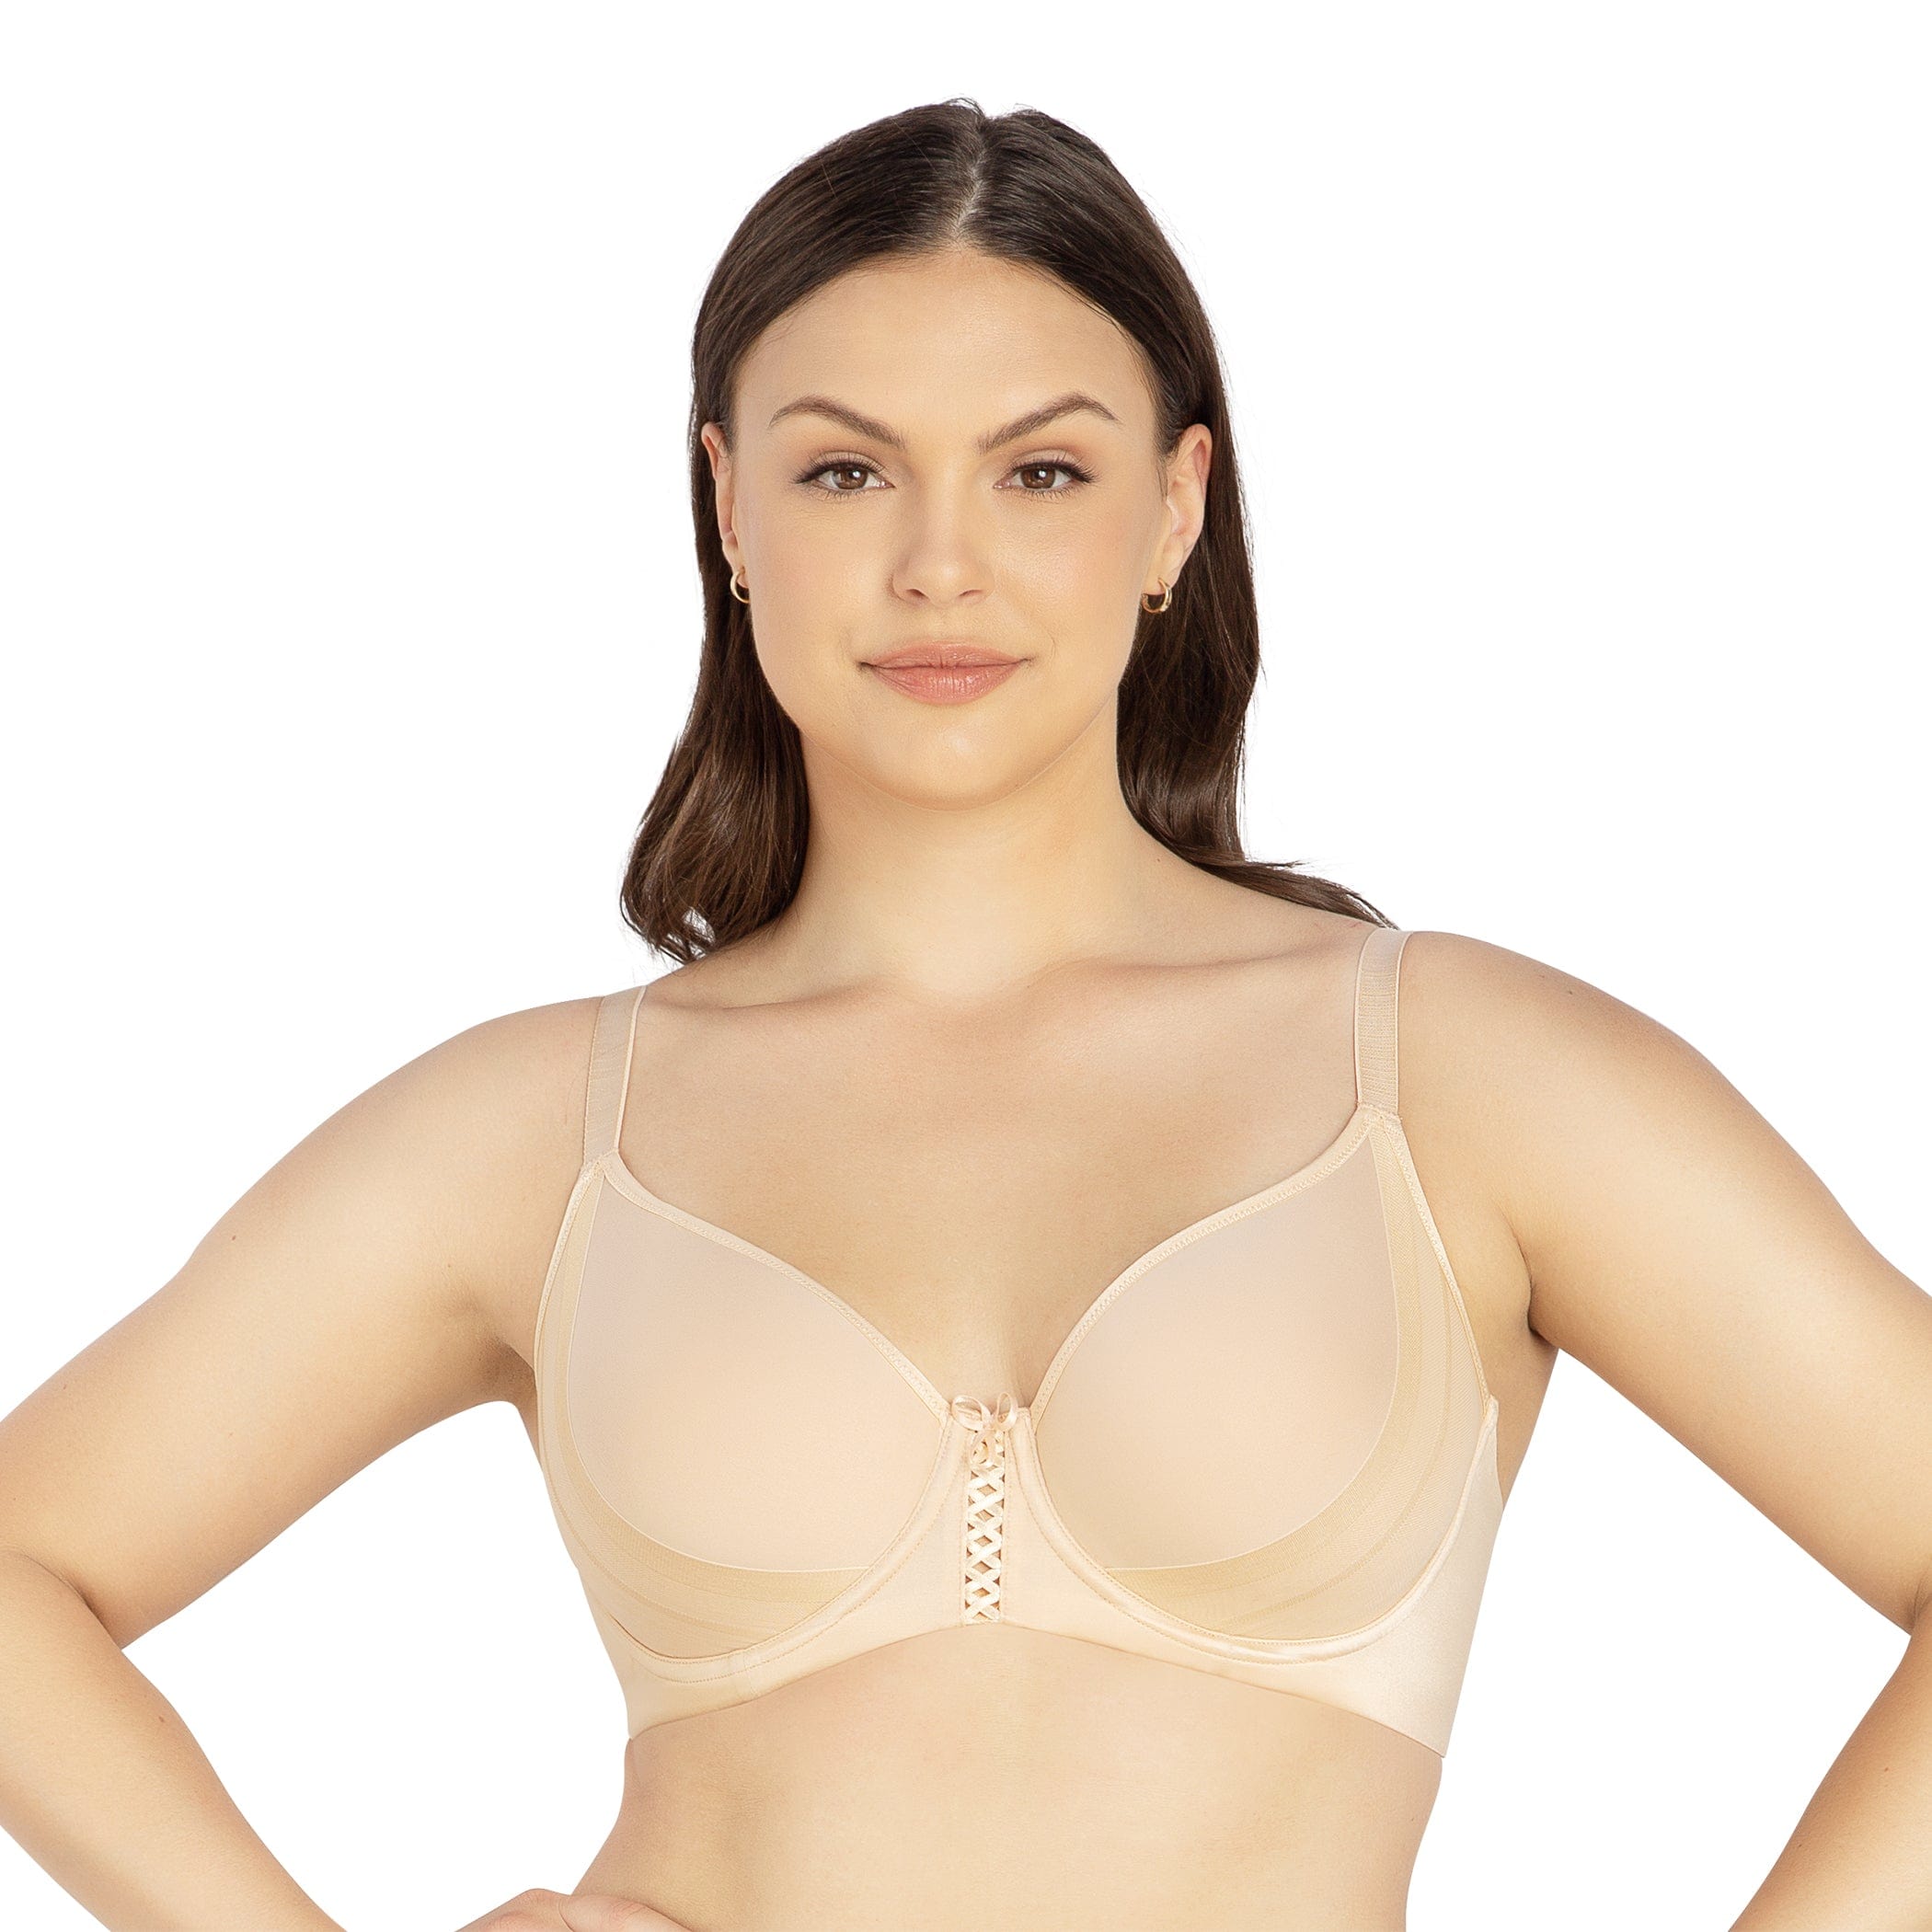 Wholesale 1 4 cup bras plus size For Supportive Underwear 